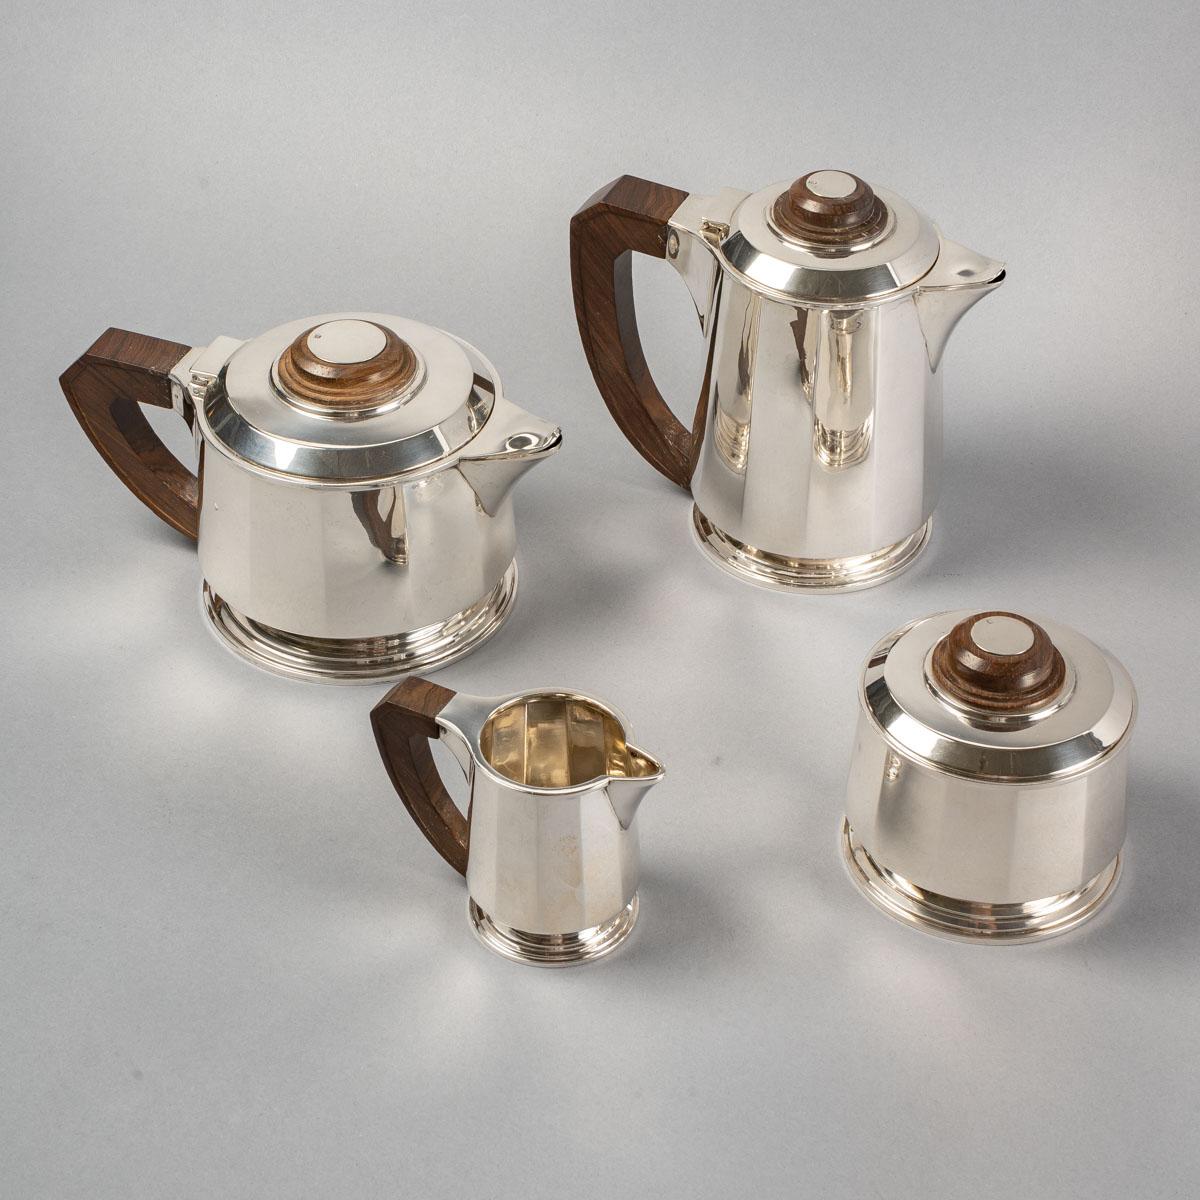 Tea and coffee service with cut sides in sterling pure silver and rosewood by Jean E. Puiforcat.

Service including :
- a coffee pot 18.5 cm x 18.5 cm
- a teapot 13.5 cm x 22 cm
- a milk jug 8 cm x 11 cm
- a sugar bowl 10.5 cm x